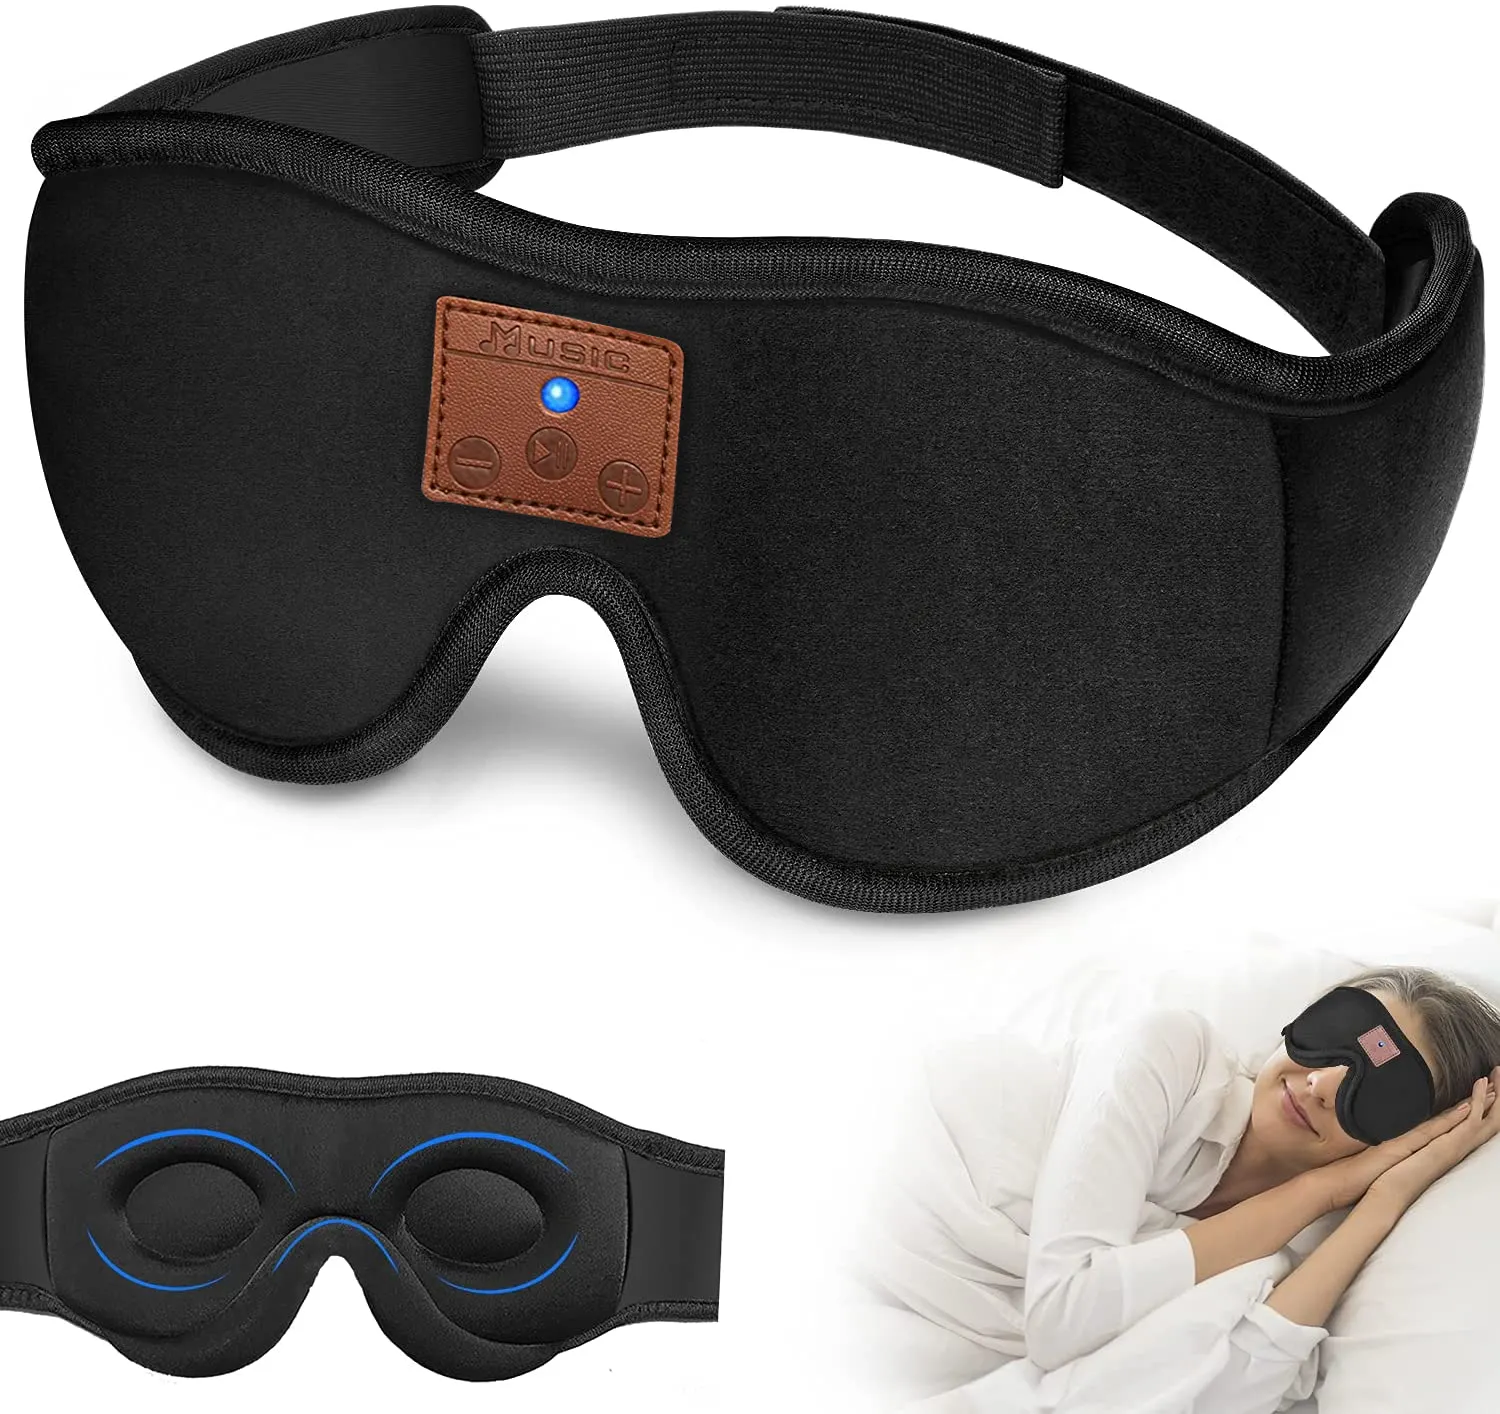 Cool Travel Gadgets Bluetooth 3d Model Eye Mask Noise Cancelling Earbuds for Sleep Music Masks Sleeping Earbuds Washable LED